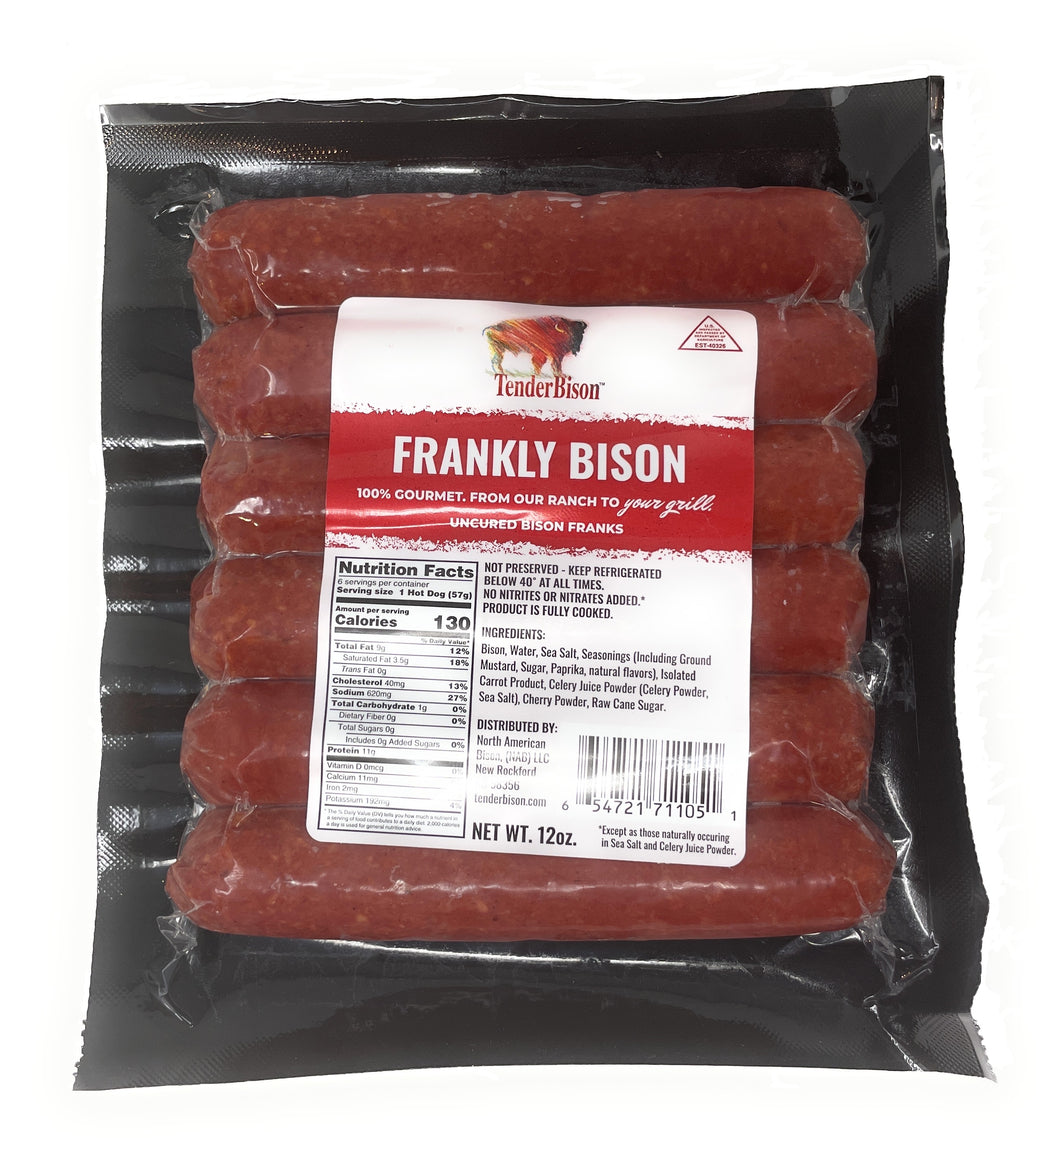 Bison 100% Hot Dogs - 60 - 2 oz. (10 Gourmet packages)